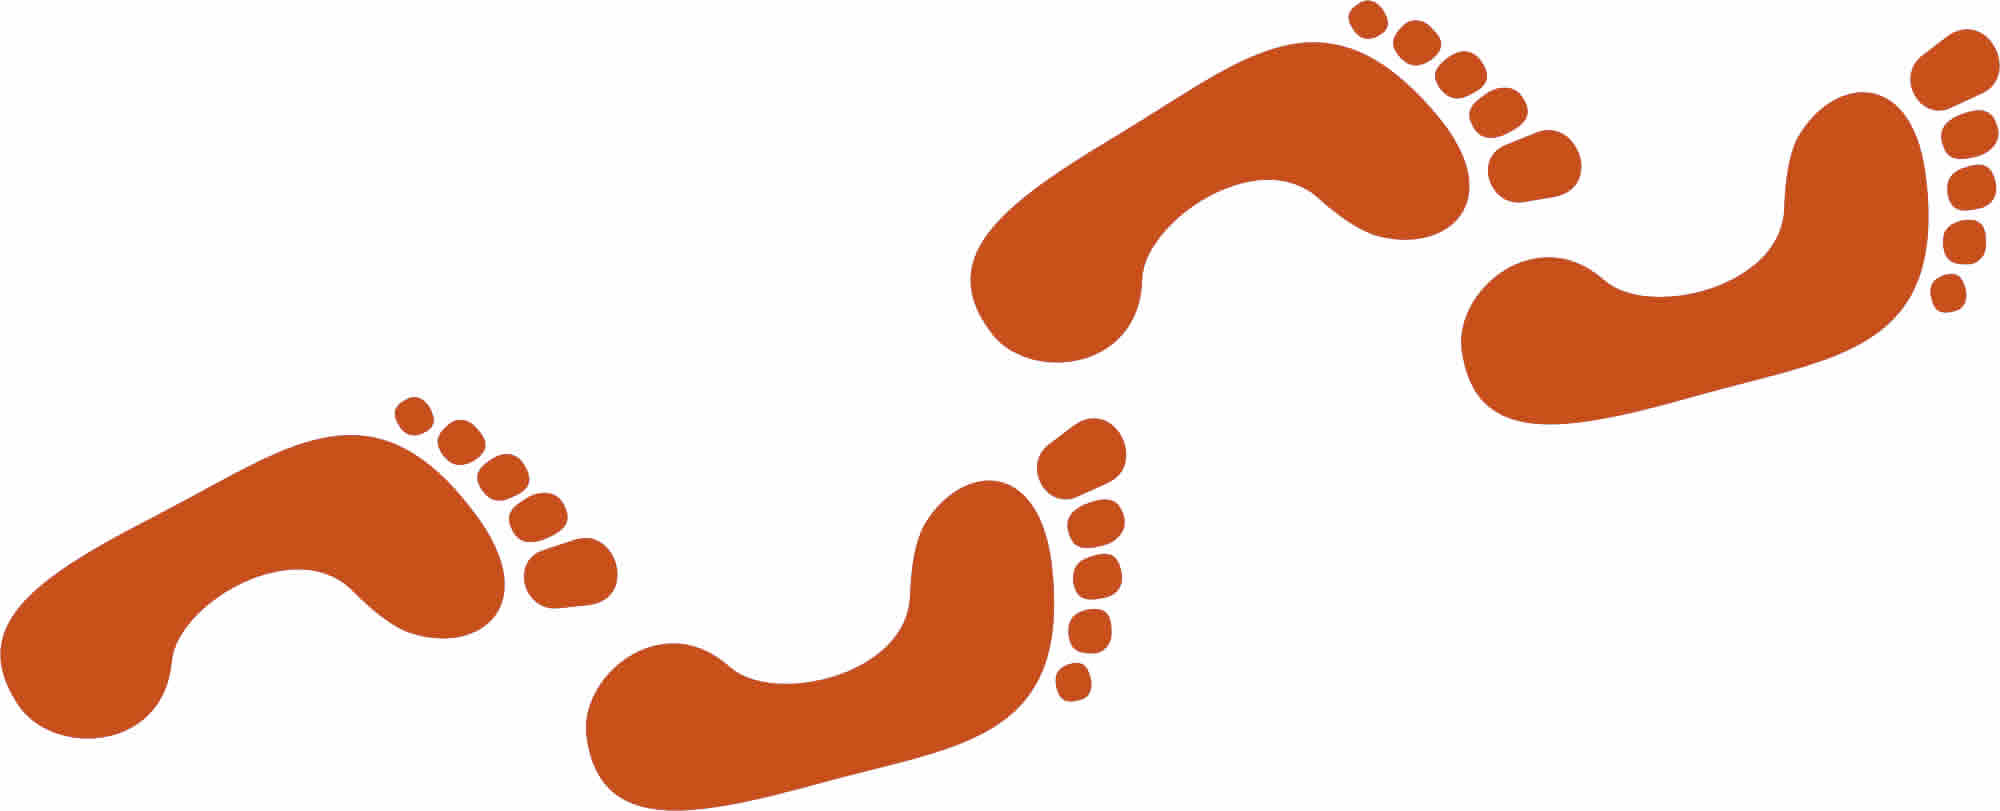 Pictures Of Feet Walking - ClipArt Best